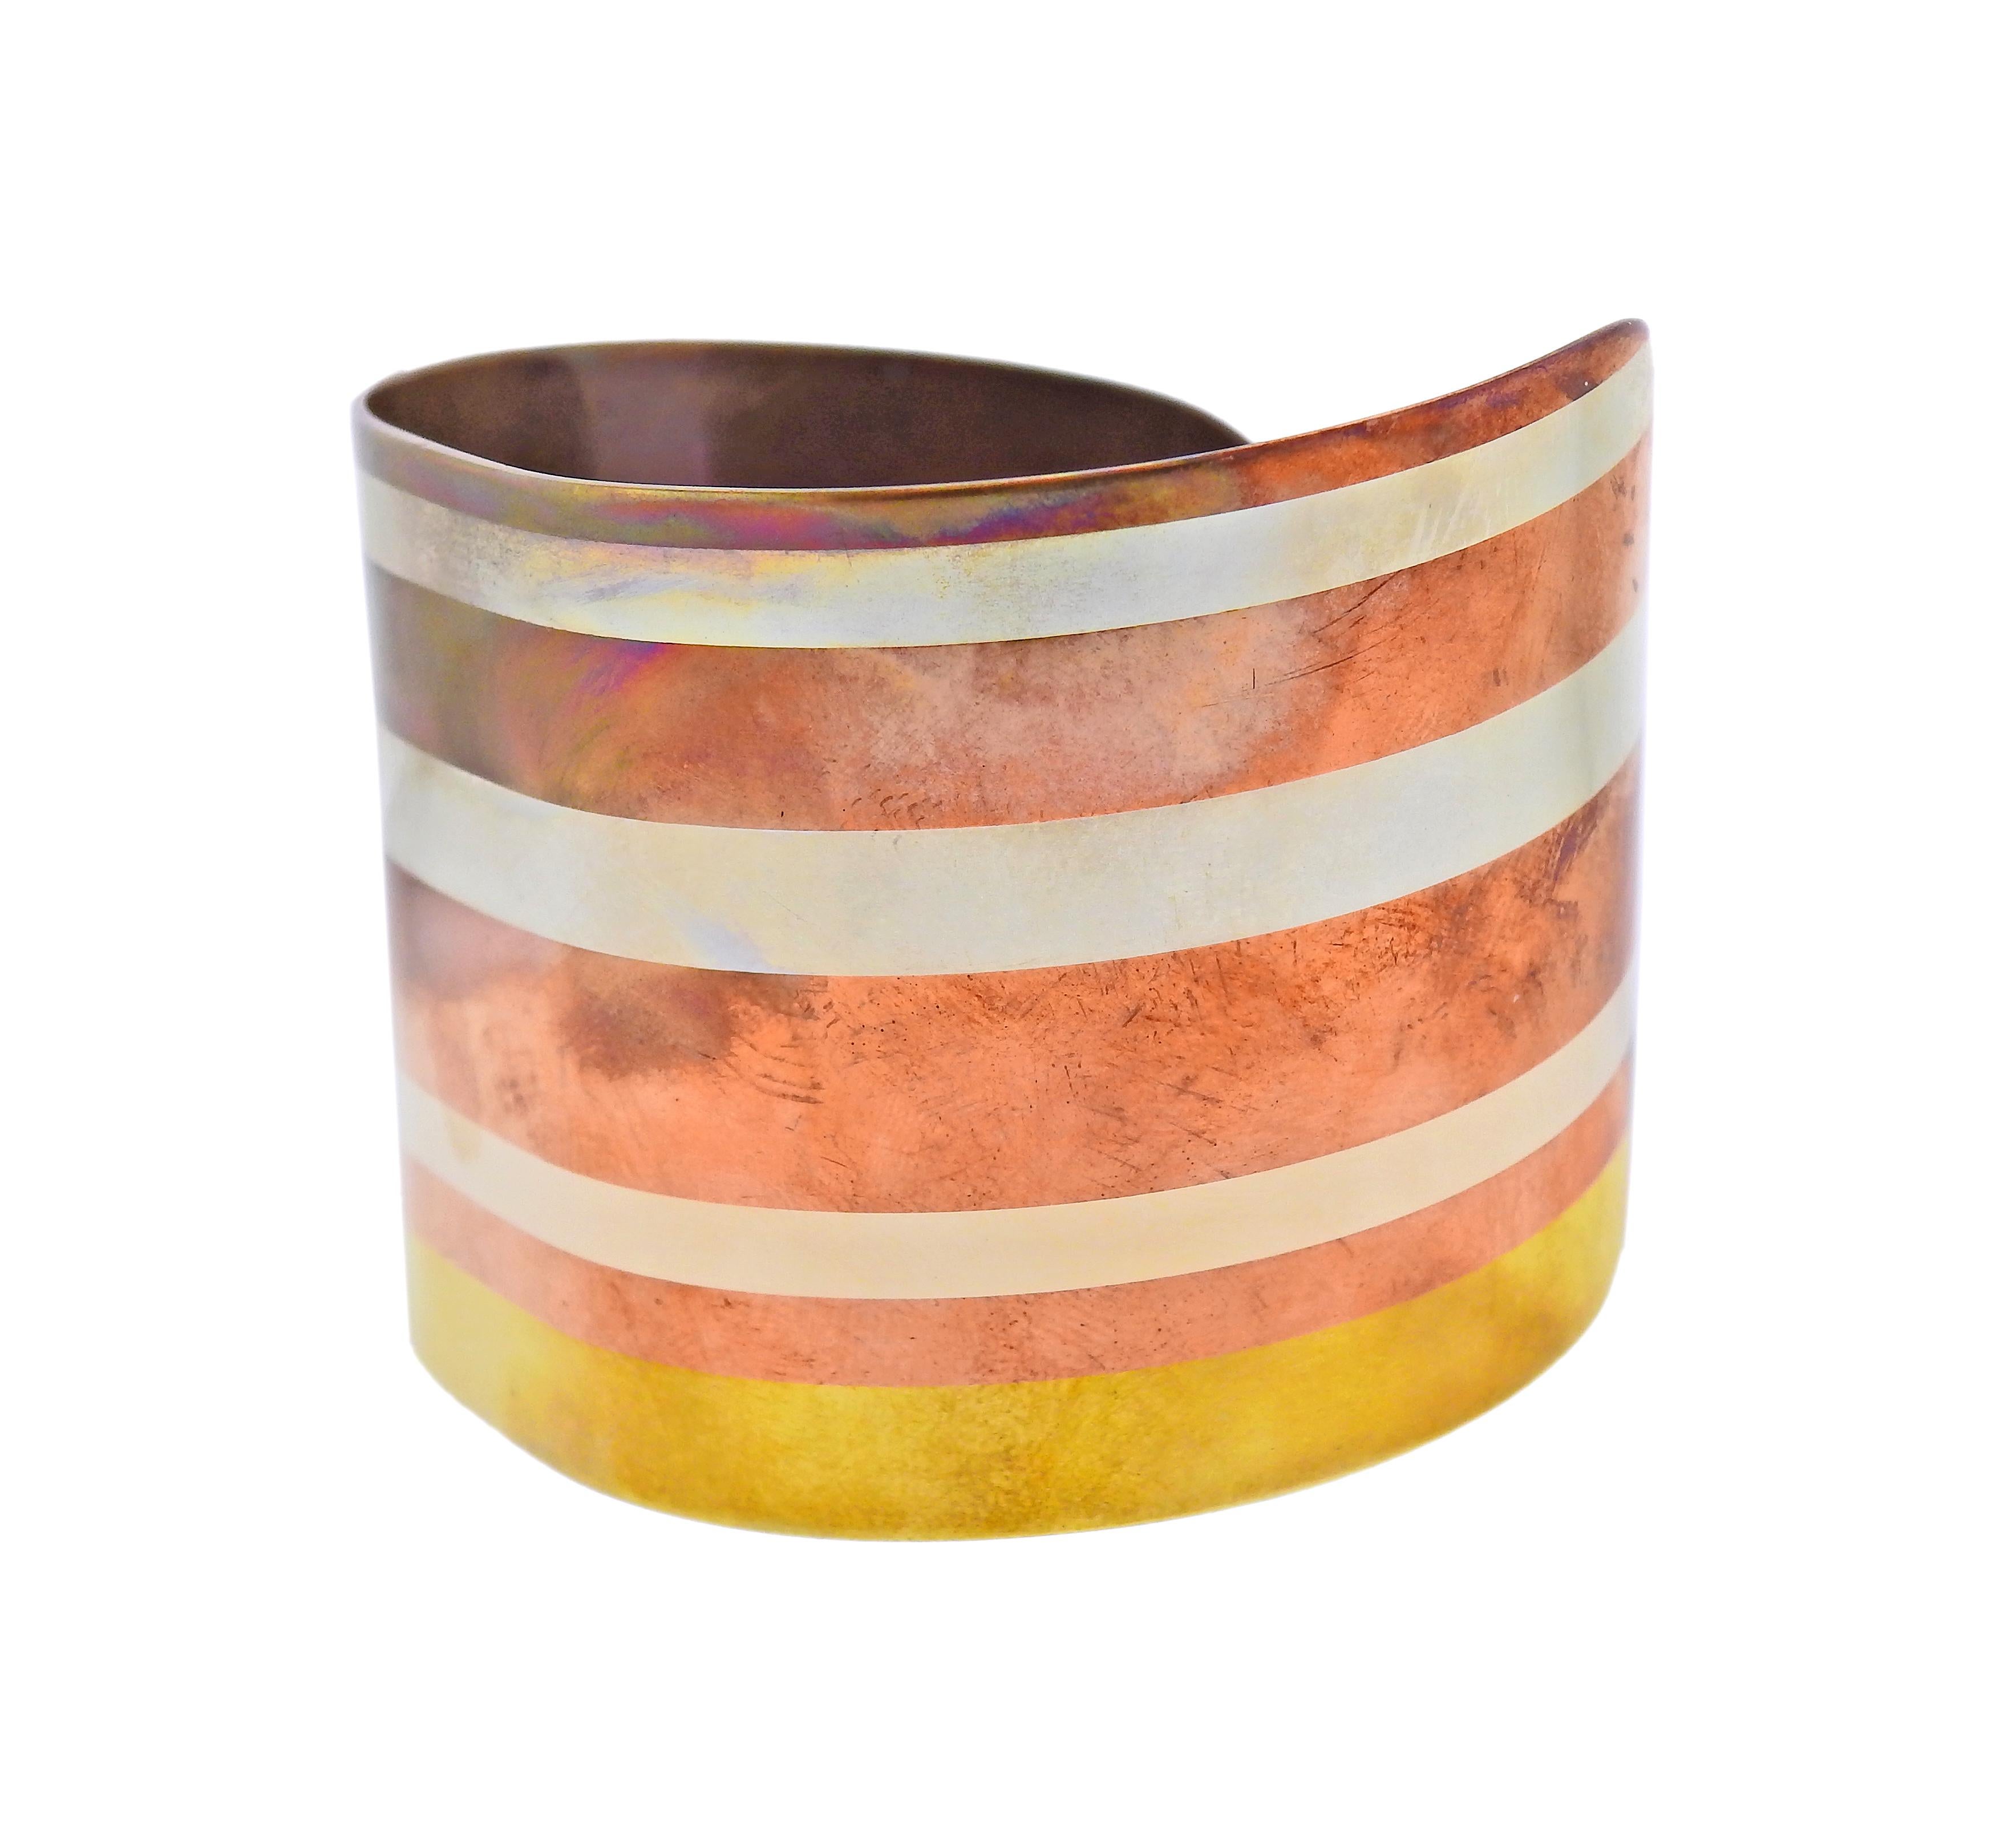 Tiffany & Co inlay mixed metal cuff bracelet, featuring silver, copper, gold. Bracelet will fit approx. 7